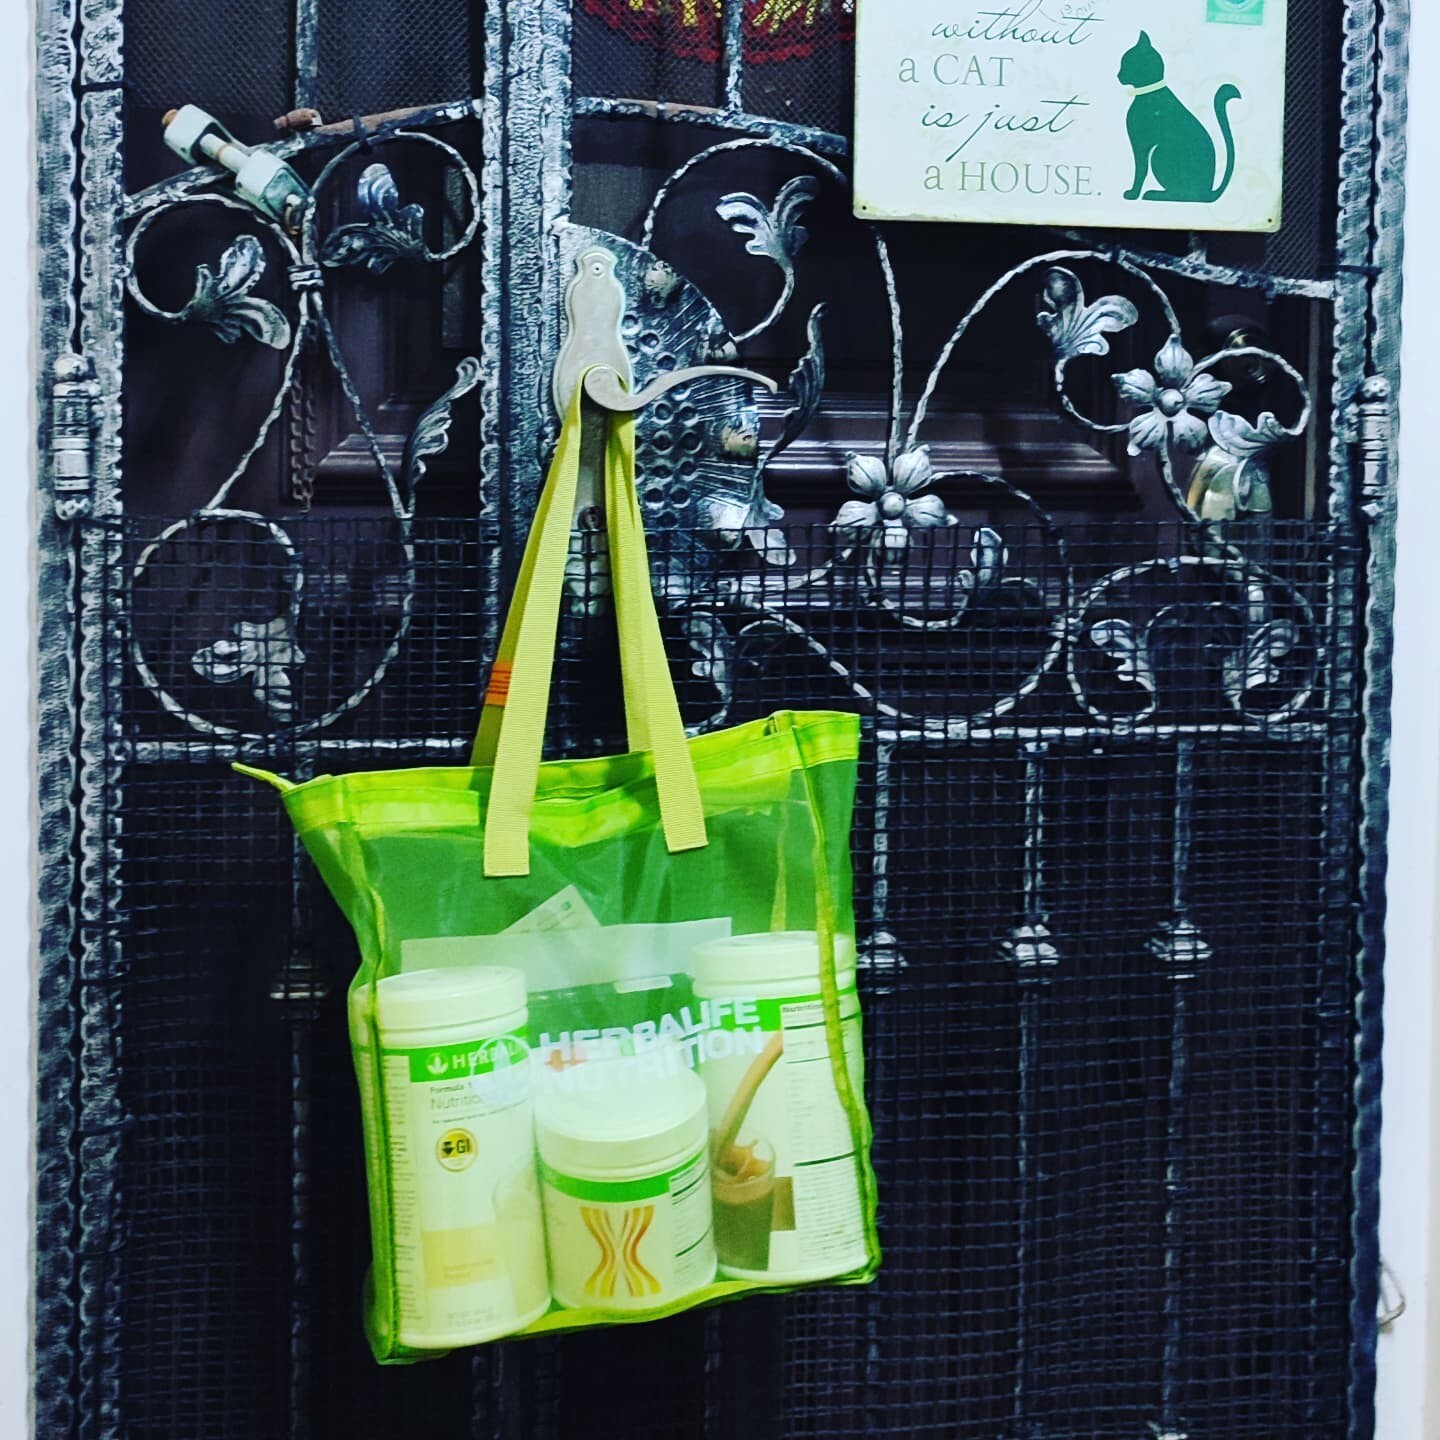 Successful Herbalife delivery at Pasir Ris, Singapore!

Customer reorders healthy protein breakfast bundle set to maintain good health, healthy weight and improve immunity.

Grab your healthy protein breakfast set from official Herbalife distributors at https://activelifestyler.com/product/healthy-breakfast-protein-set/

#herbalifenutritionsg #herbalifesingapore #herbalifeshop #herbalife #activelifestyler #herbalifenutrition #herbalifeindependentdistributor #herbalifemember